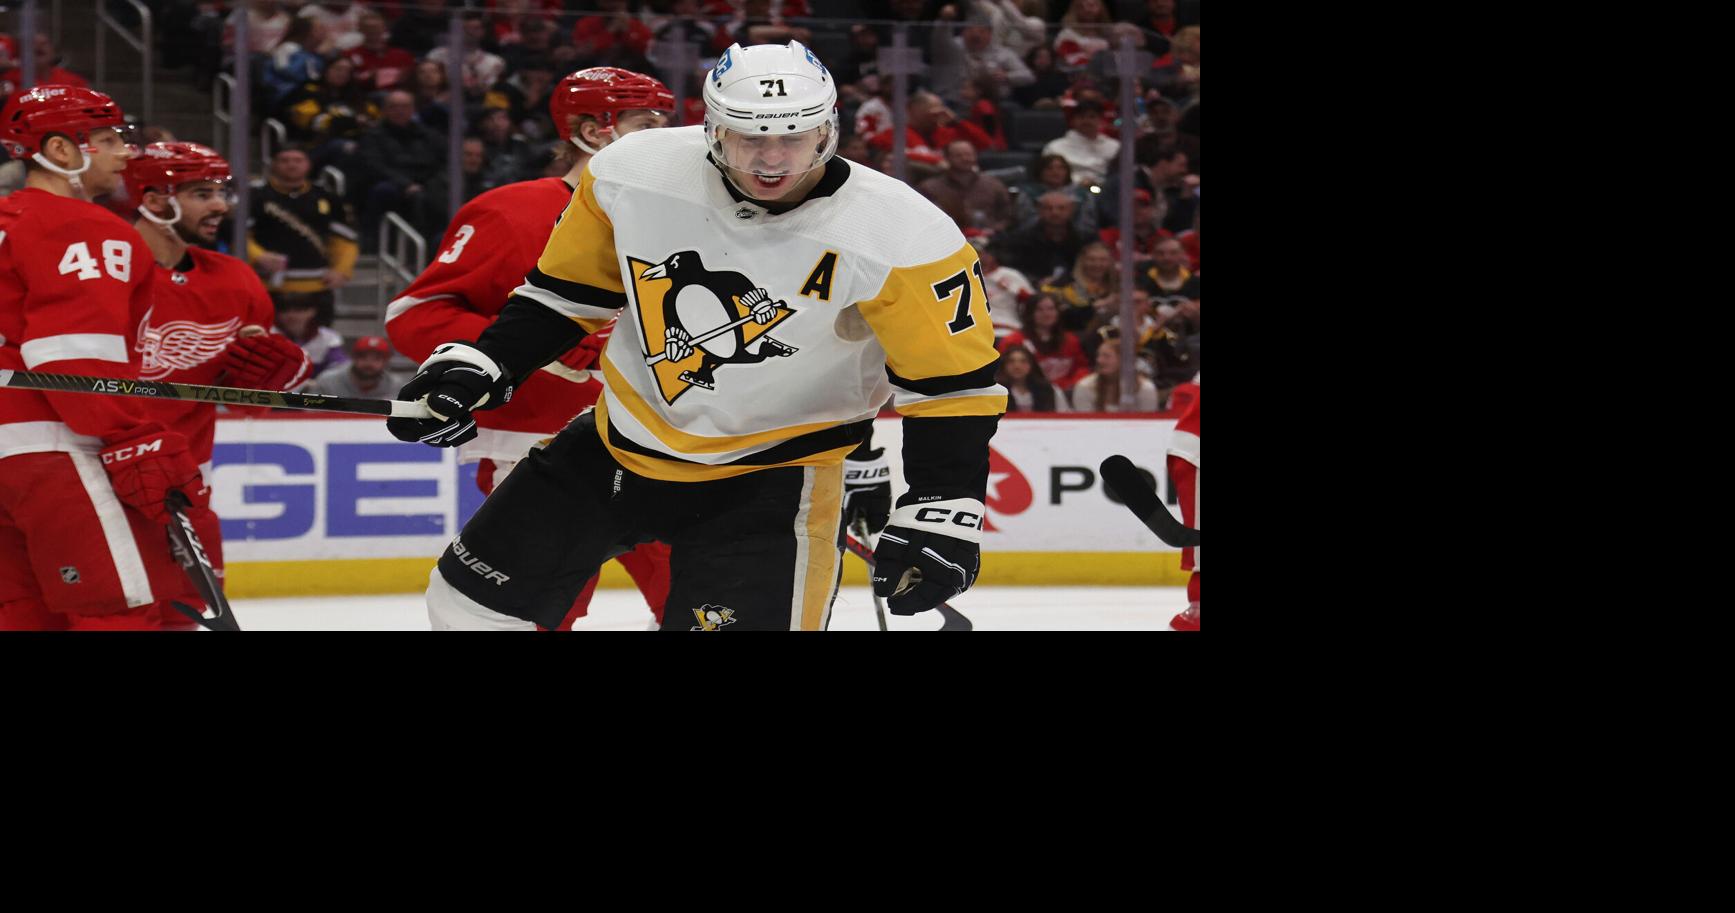 Penguins Kris Letang Provides Meals for Children & Families in Need